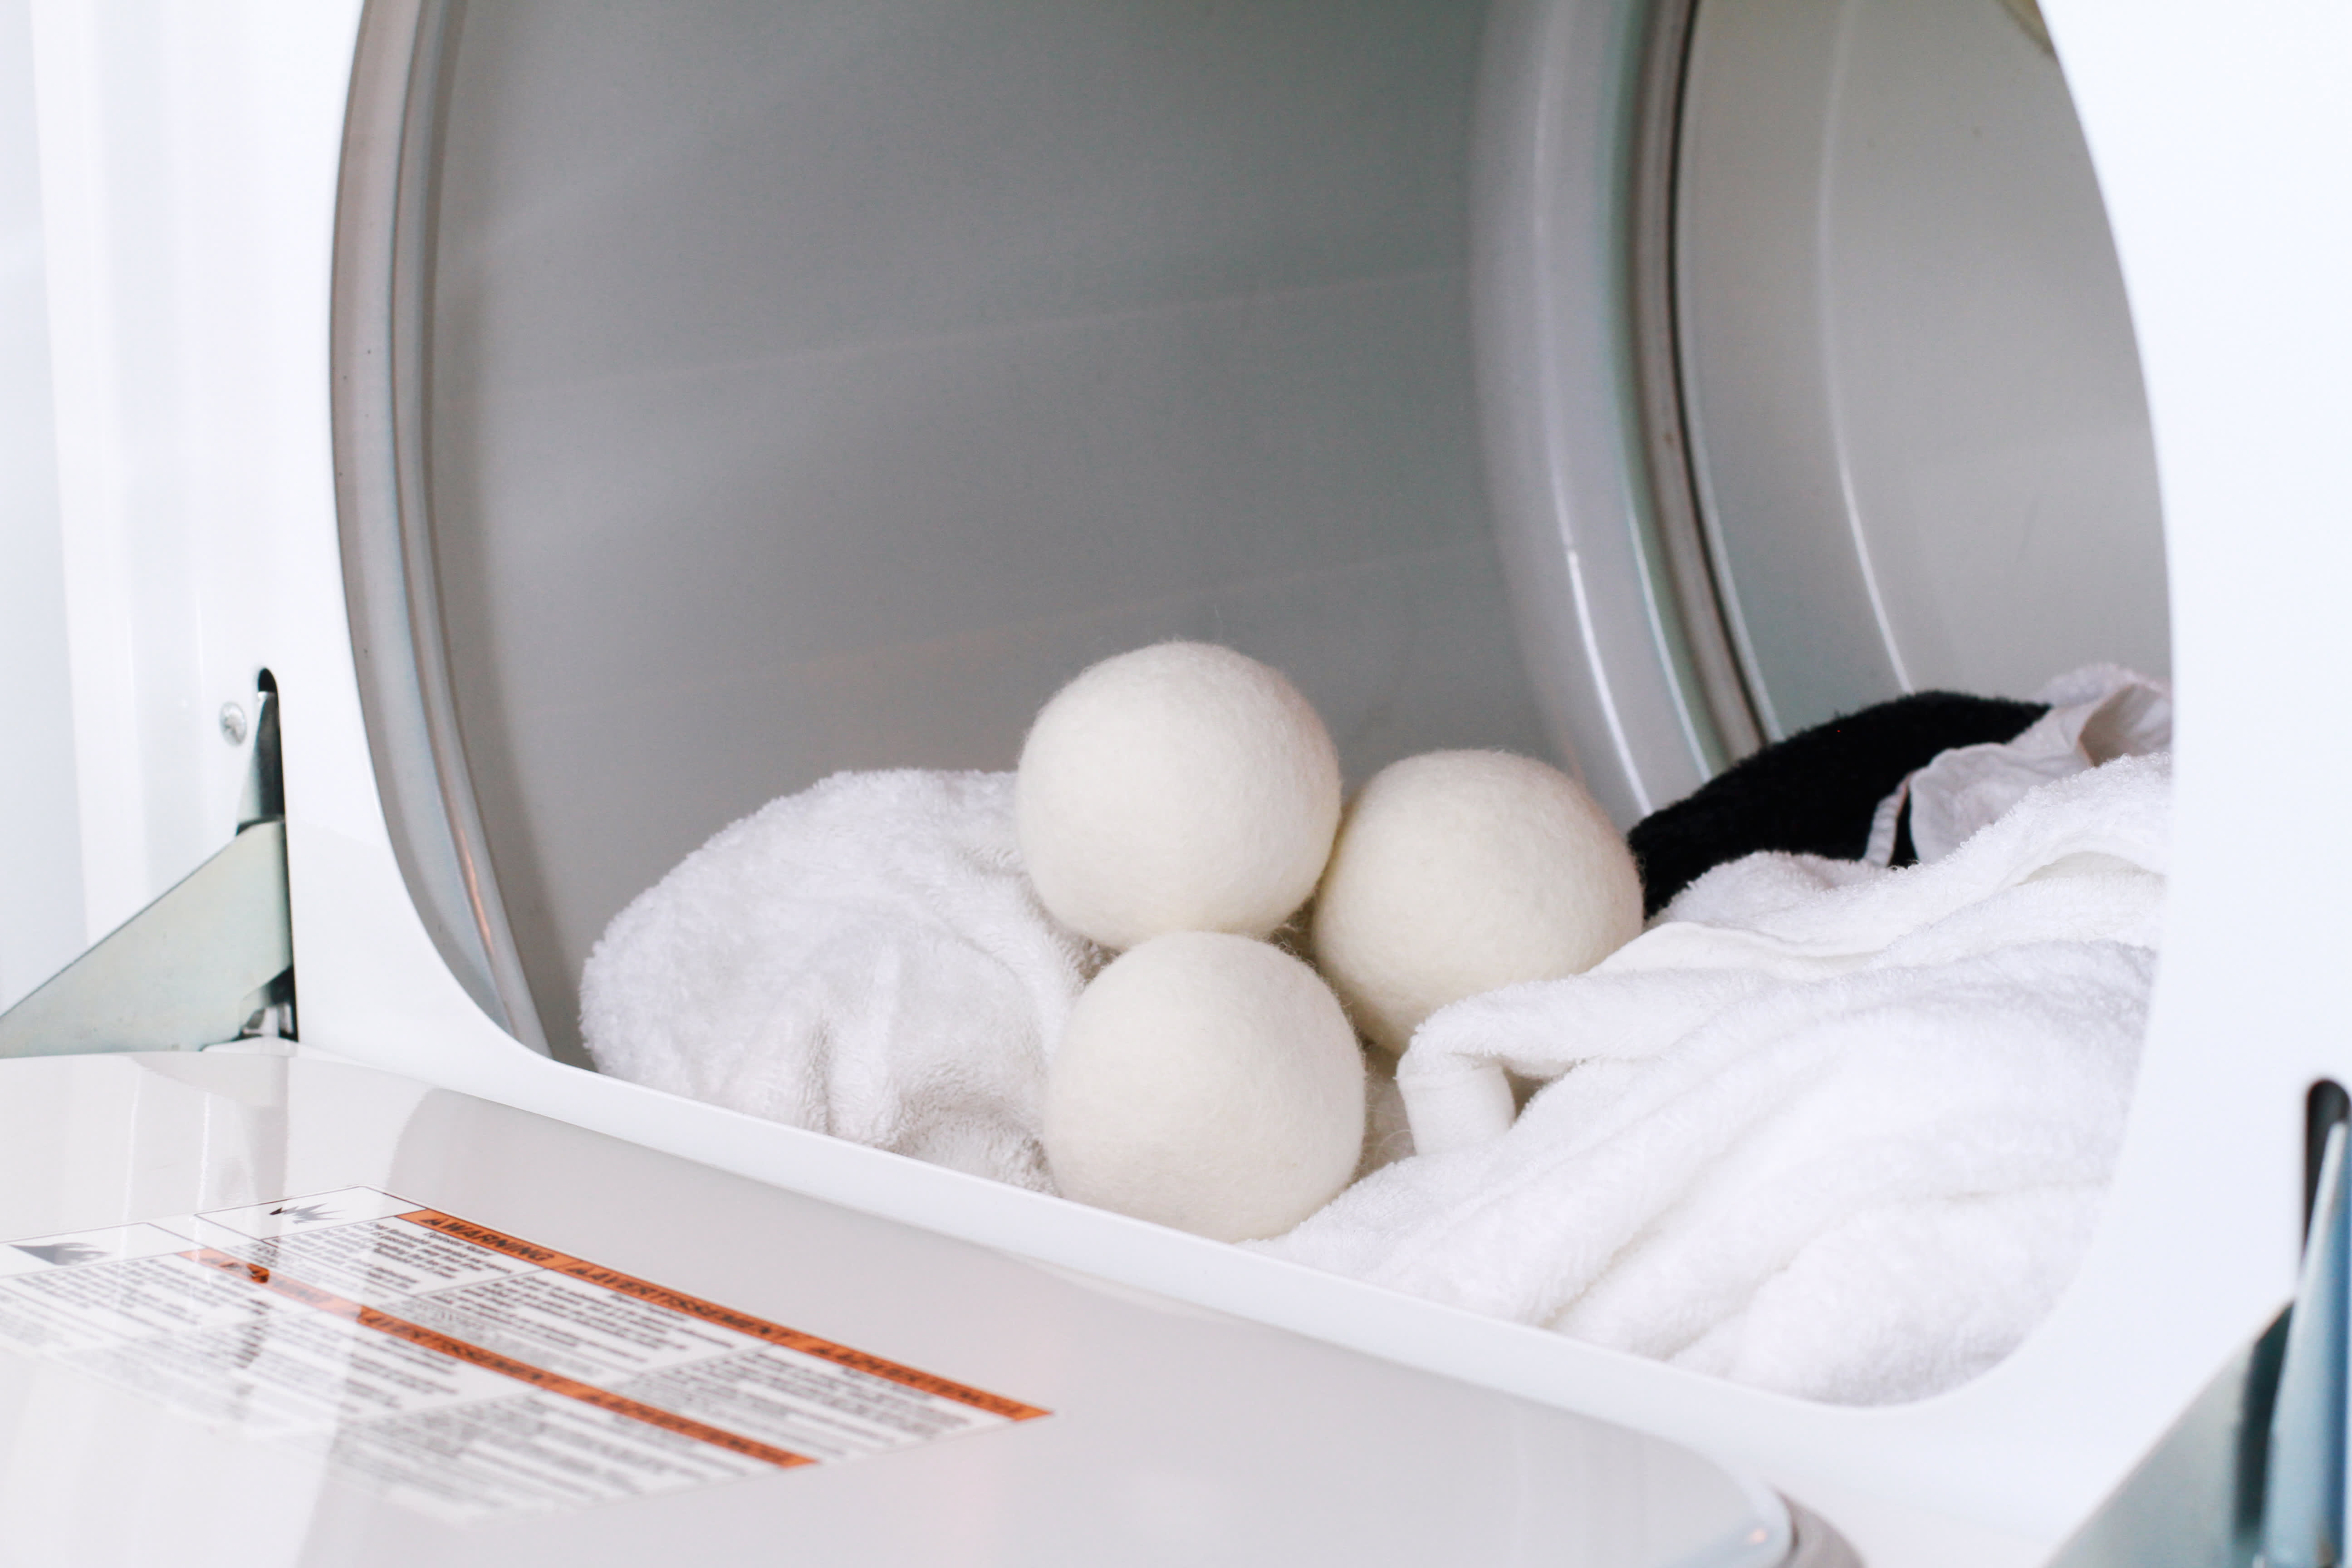 Why You Should Stop Using Dryer Sheets Immediately